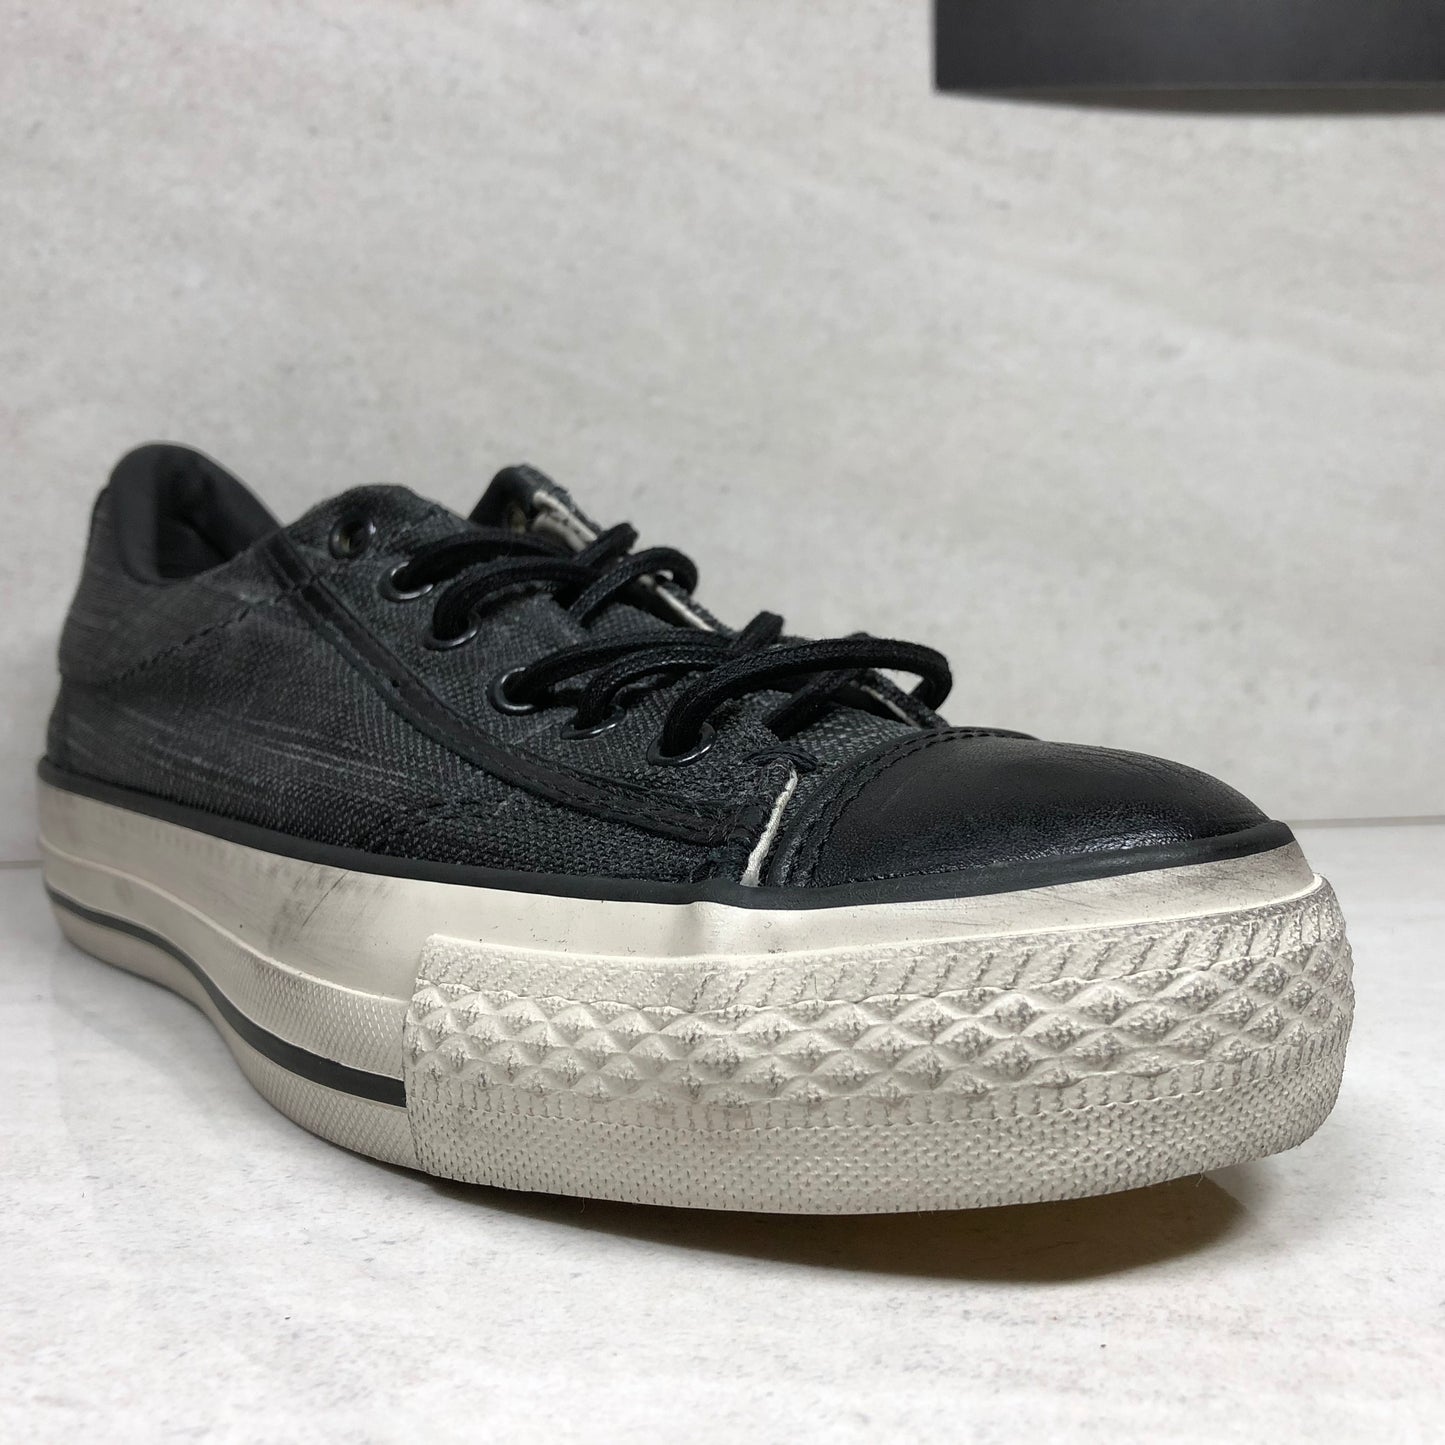 DS Converse Chuck Taylor Coated Canvas Low Top Tamaño 3-6.5M/5-8.5W Negro 150179C